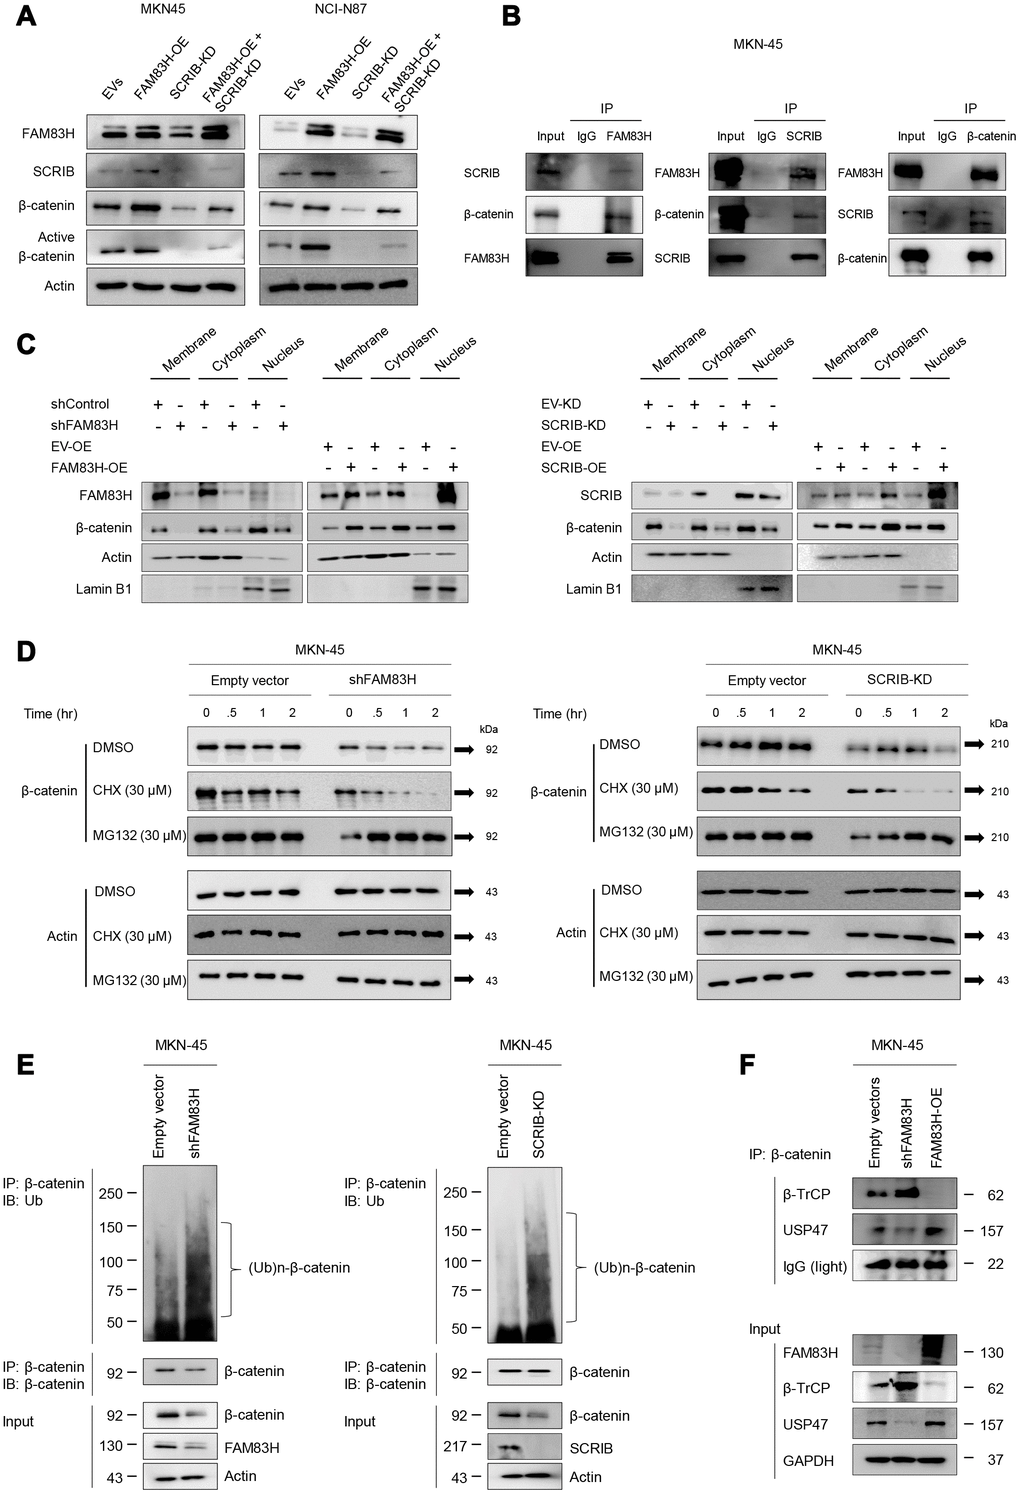 FAM83H and SCRIB are involved in the stabilization of β-catenin from proteasomal ubiquitin degradation. (A) Western blot for β-catenin and active β-catenin after overexpression of FAM83H and/or knock-down of SCRIB. (B) The protein lysate obtained from MKN-45 cells after immunoprecipitation with FAM83, SCRIB, or β-catenin. Thereafter, the immunoprecipitated protein was immunoblotted for FAM83H, SCRIB, and β-catenin. (C) Western blot for FAM83H, SCRIB, β-catenin, actin, and lamin B1 with the cytoplasmic membrane, cytoplasm, and nuclear protein lysates fractionated according to subcellular localization after inducing knock-down or overexpression of FAM83H or SCRIB in MKN-45 cells. (D) The MKN-45 cells were transfected with empty vector, shRNA for FAM83H, or hSCRIB CRISPR/Cas9 KO plasmid and treated with 30 μM cycloheximide or 30 μM MG132 for 0.5 to 4.0 hours. Thereafter, the total protein was immunoblotted for β-catenin and actin. (E) The MKN-45 cells were transfected with empty vector, shRNA for FAM83H, or hSCRIB CRISPR/Cas9 KO plasmid, and were treated with 30 μM MG132 for two hours. The protein lysate was immunoprecipitated with anti-β-catenin antibodies and immunoblotted with anti-ubiquitin antibodies. The immunoblot was performed on total protein lysate. (F) The MKN-45 cells were transfected with empty vectors, shRNA for FAM83H, or an overexpression vector for FAM83H. The protein lysate was immunoprecipitated with anti-β-catenin antibodies and immunoblotted with anti-β-TrCP, anti-USP47, or anti-GAPDH antibodies. The immunoblots were performed on total protein lysate.